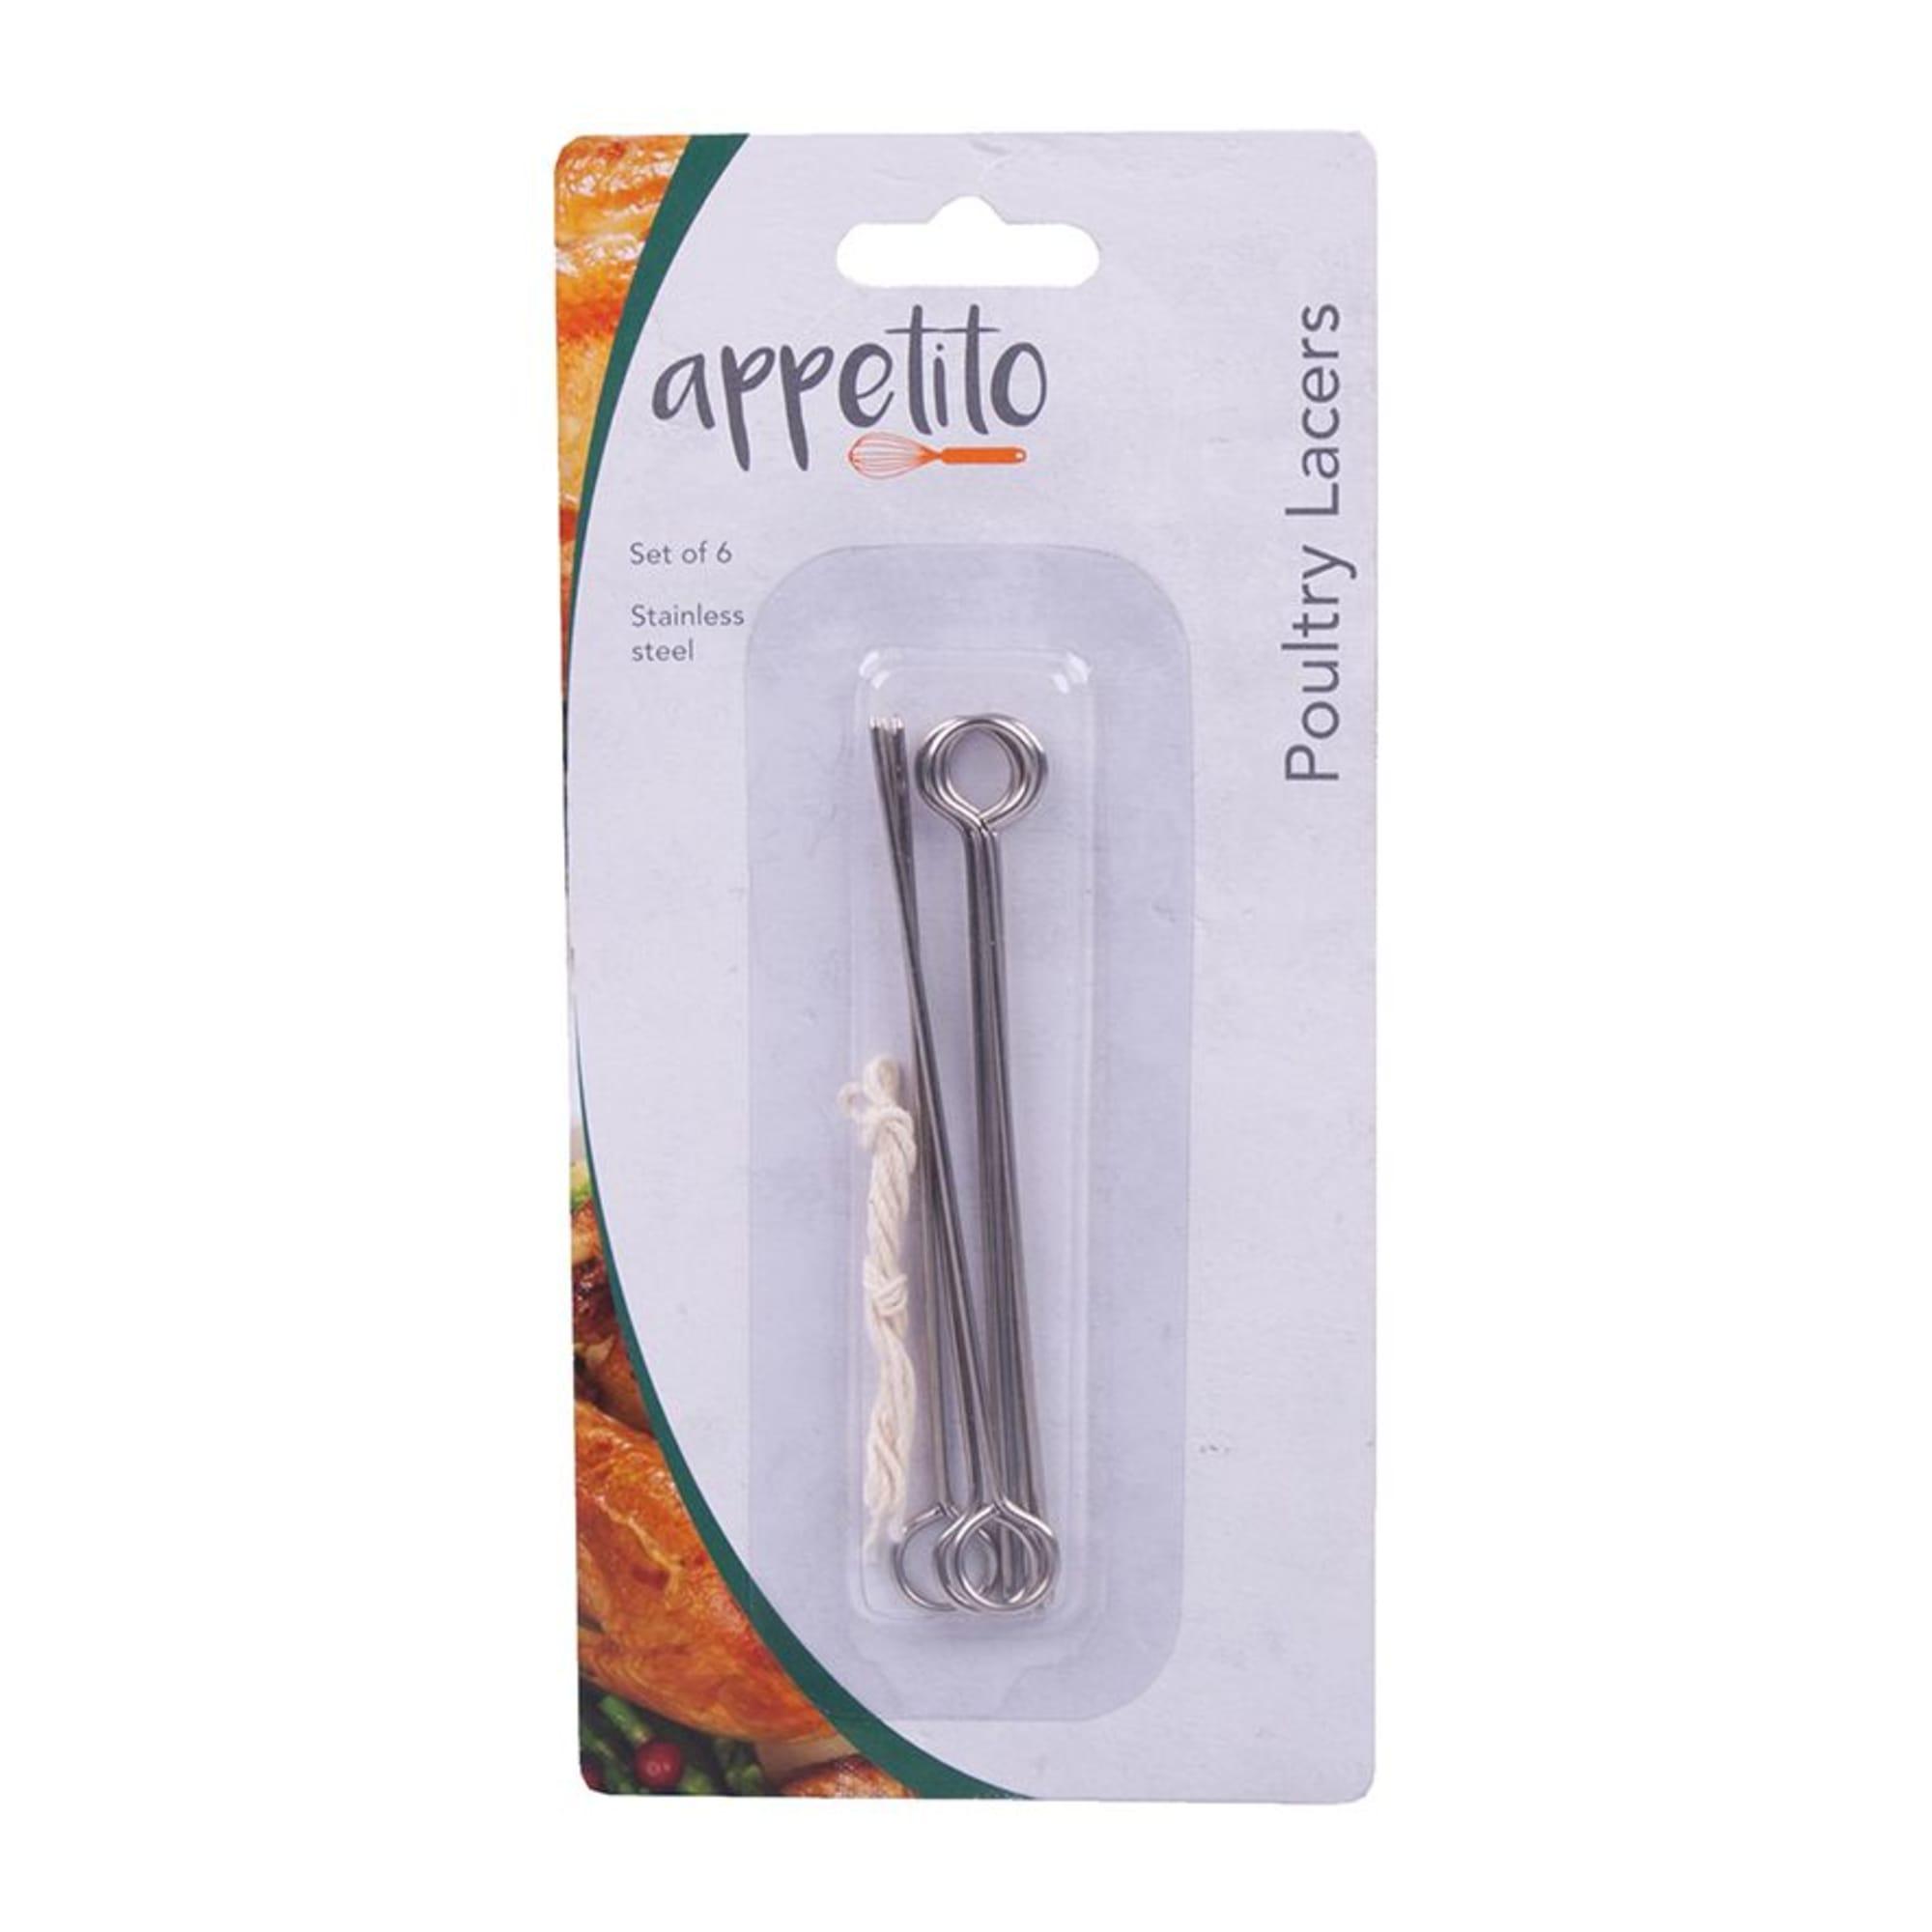 Appetito Poultry Lacer Set of 6 Image 2